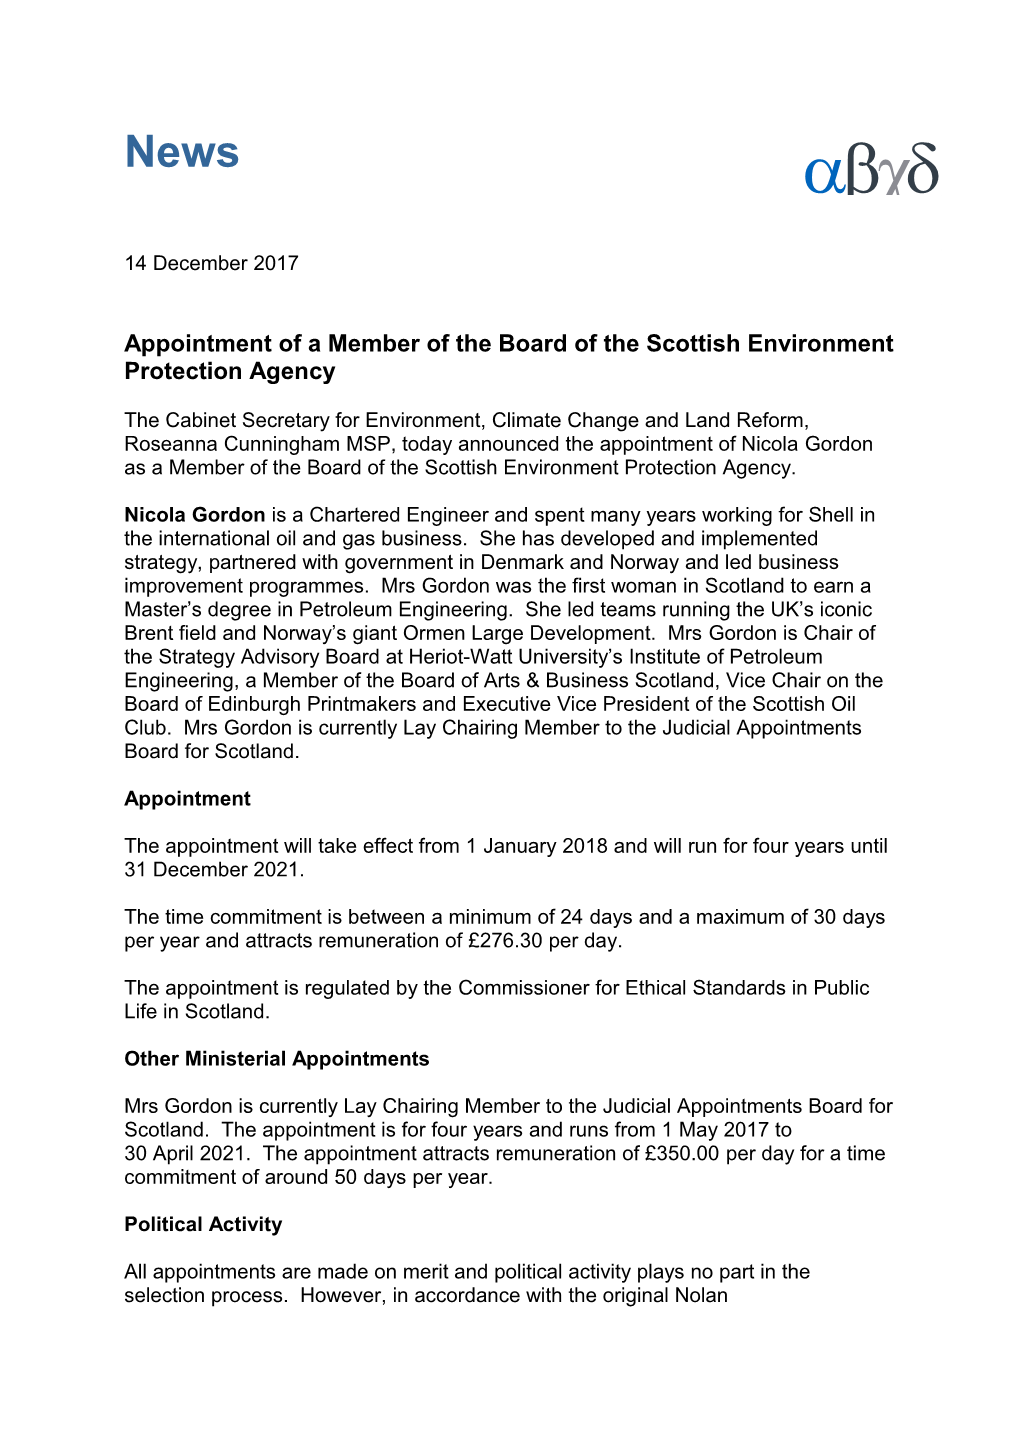 Appointment of a Member of the Board of the Scottish Environment Protection Agency